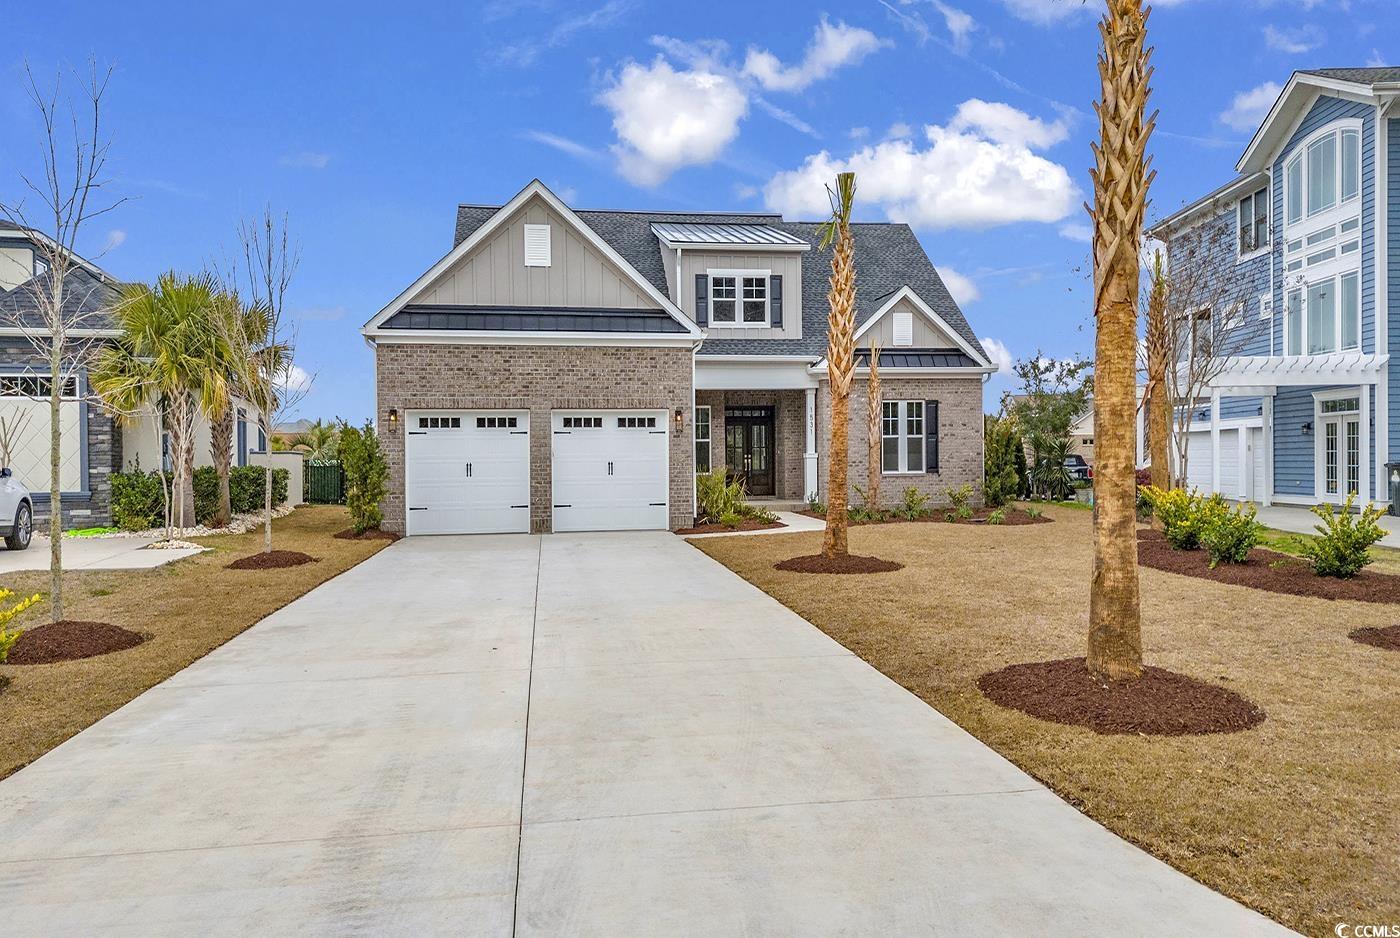 construction has been completed! schedule your tour today!  welcome to 1531 biltmore drive in carolina waterway plantation, lot 289, myrtle beach, sc 29579. along with a statement address, you'll find this truly gracious home is under construction, offering a blend of elegance and modern living like no other. spanning 2706 heated square feet and a grand total of 3696 square feet, this residence exudes an air of sophistication and spaciousness. with 3 bedrooms and 2 1/2 baths, it's designed to accommodate your family's every need. what sets this home apart is its dedication to energy efficiency, powered by propane for a greener footprint and lower utility bills. it's not just a house; it's a sustainable sanctuary. as you approach this home, you'll be captivated by its timeless allure - all brick on four sides with exquisite board & batten detailed accents, an impressive 8-foot double door entry, and a transom above, creating a grand welcome. step inside to discover an expansive open floor plan that flows seamlessly throughout. the great room boasts a stunning 9-panel coffered ceiling, a true masterpiece of architectural beauty. the heart of this home is the chef's kitchen, where culinary dreams come true. an 8-foot quartz island, double wall ovens, a 36-inch gas cooktop, and an in-drawer microwave provide everything you need to create culinary masterpieces. the large breakfast area overlooks the serene waters outside, while the separate formal dining room adds an extra touch of elegance to your dining experience. with 10-foot ceilings throughout the main areas, this home breathes airiness and sophistication. the large rear covered porch, complete with a water view, is the perfect spot to unwind and enjoy the outdoors. a 12-foot wide by 8-foot tall sliding 4 panel door system opens to connect the great room to the covered porch, creating a seamless transition between indoors and outdoors. the primary bedroom is a haven of luxury, featuring a double box tray ceiling that soars up to 12 feet, allowing you to gaze upon the tranquil water view. the en-suite bathroom is a spa-like retreat, complete with a beautiful free-standing tub and a separate beach entry tiled walk-in shower. 1531 biltmore drive represents the epitome of elegant living, where modern meets classic charm, and where every detail has been meticulously thought out. this gracious home, still under construction, is waiting for you to make it your own. experience the beauty, the energy efficiency, and the comfort that this home has to offer. it's not just a house; it's a lifestyle. carolina waterway plantation has all the amenities your heart desires being on the intercoastal waterway.  this gated community has a clubhouse, pool, boat ramp. boat storage. pickle ball, tennis courts and playground.  this location is close to the beach, shopping, dining and golf!  it's not just a house; it's a lifestyle. welcome home!